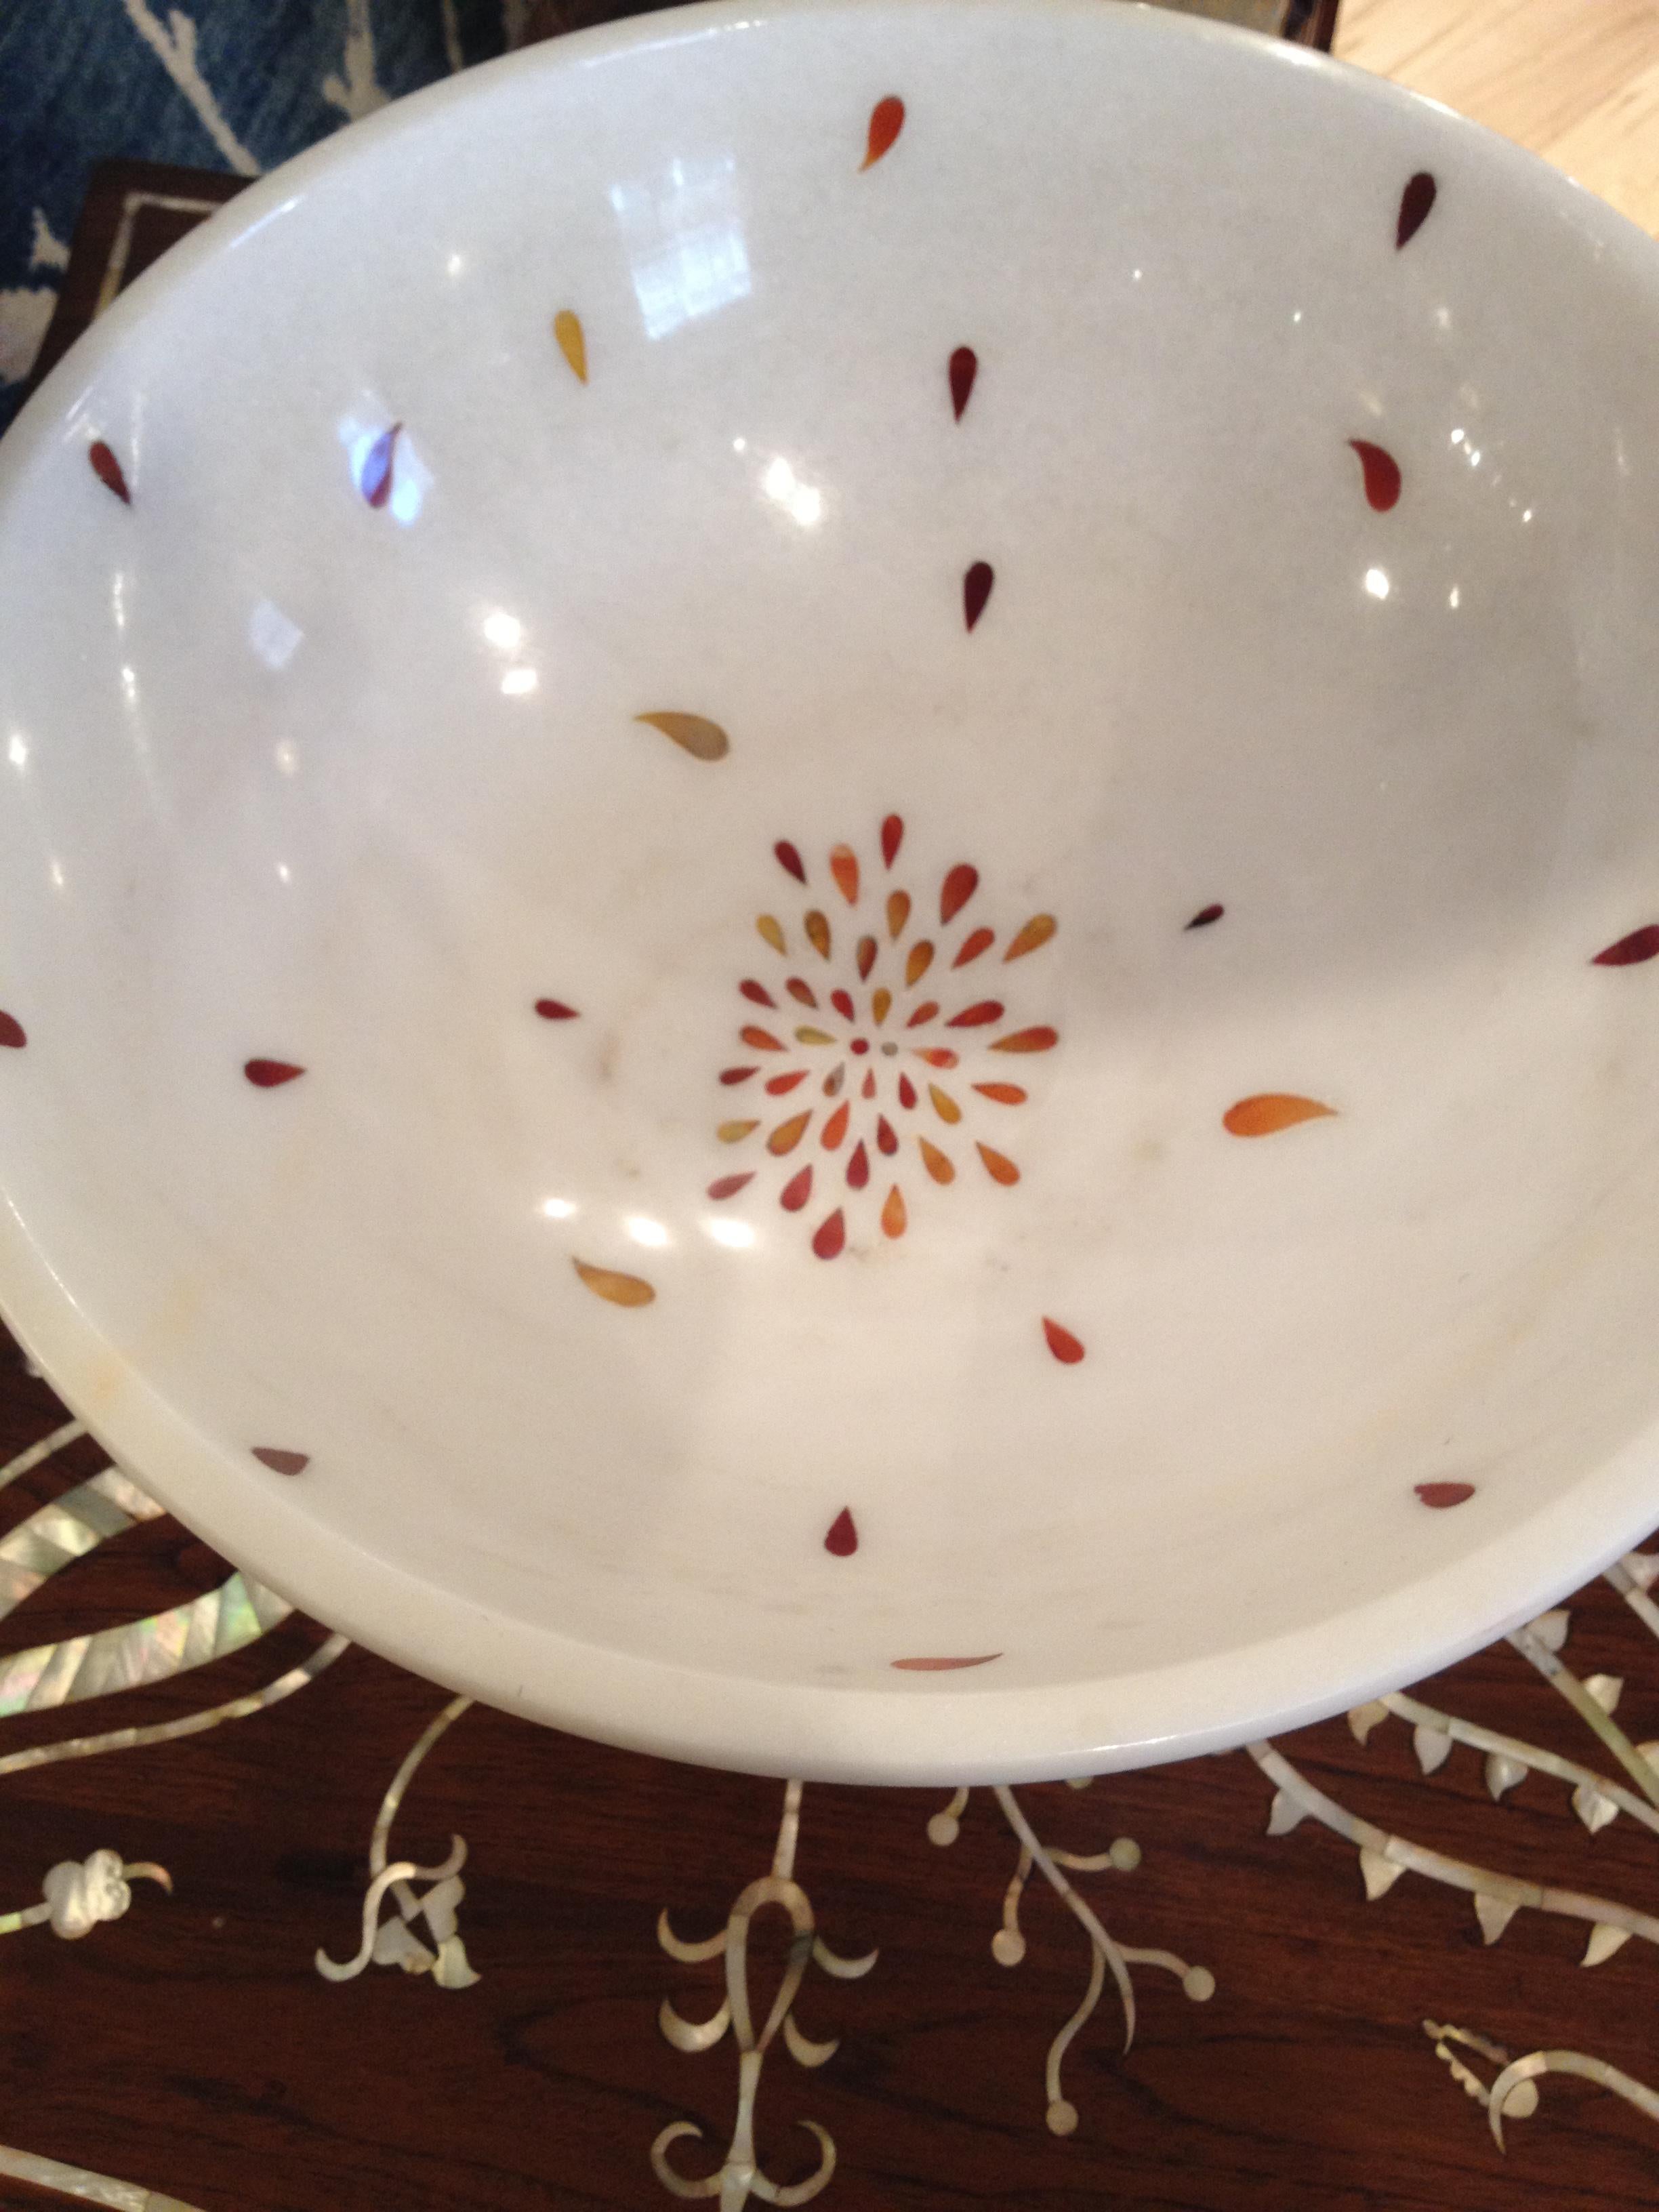 Shown in Agra white marble inlayed with semi precious stones. Modern designs and patterns using the Pietra Dura method originated in Florence in the 17th century.

Petals Bowl in White Marble
Size- 16